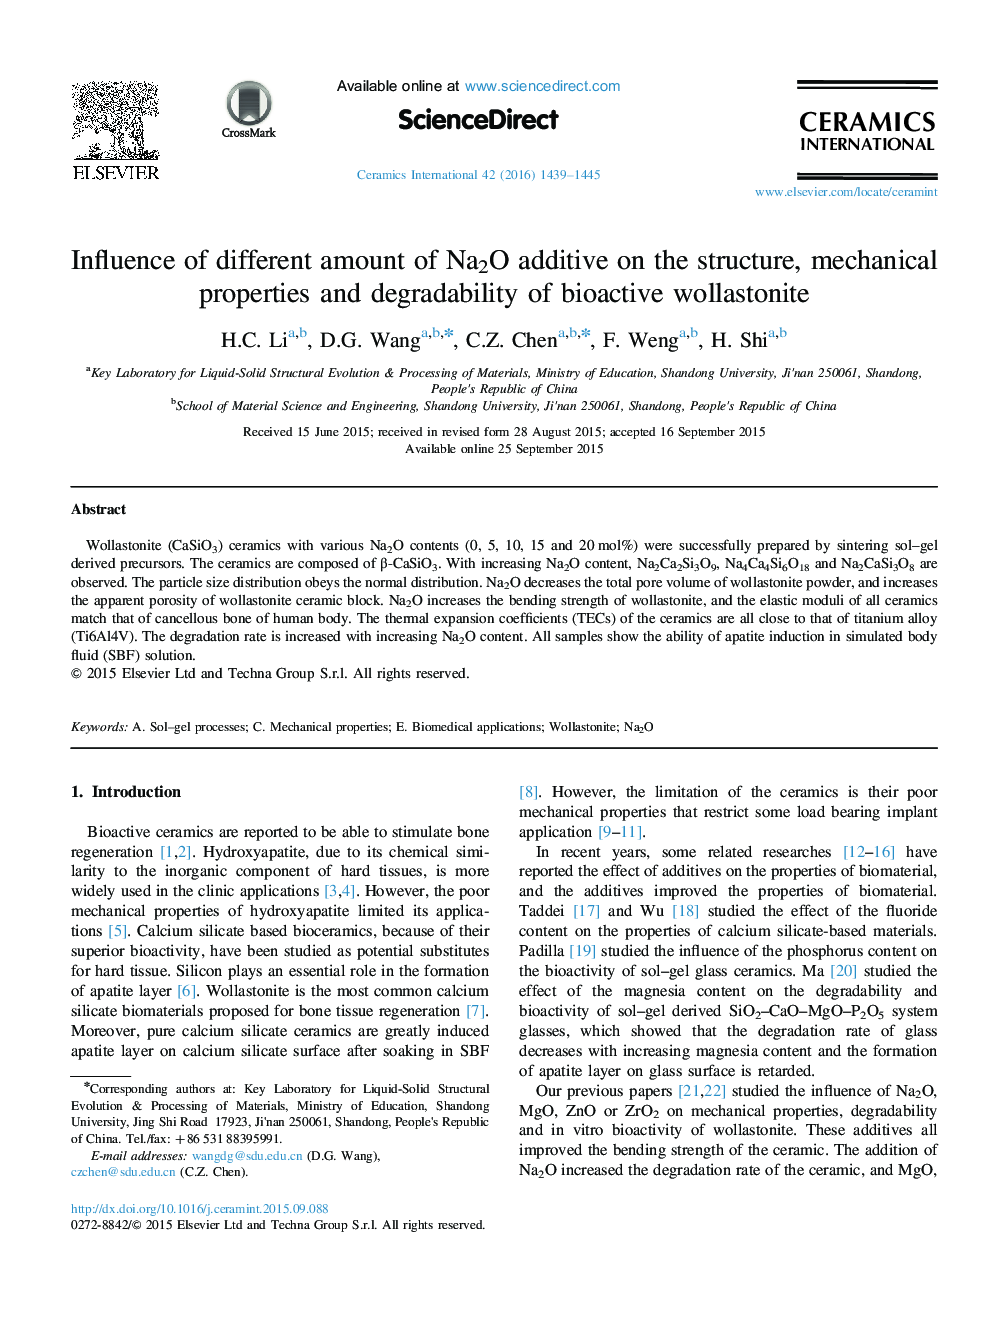 Influence of different amount of Na2O additive on the structure, mechanical properties and degradability of bioactive wollastonite